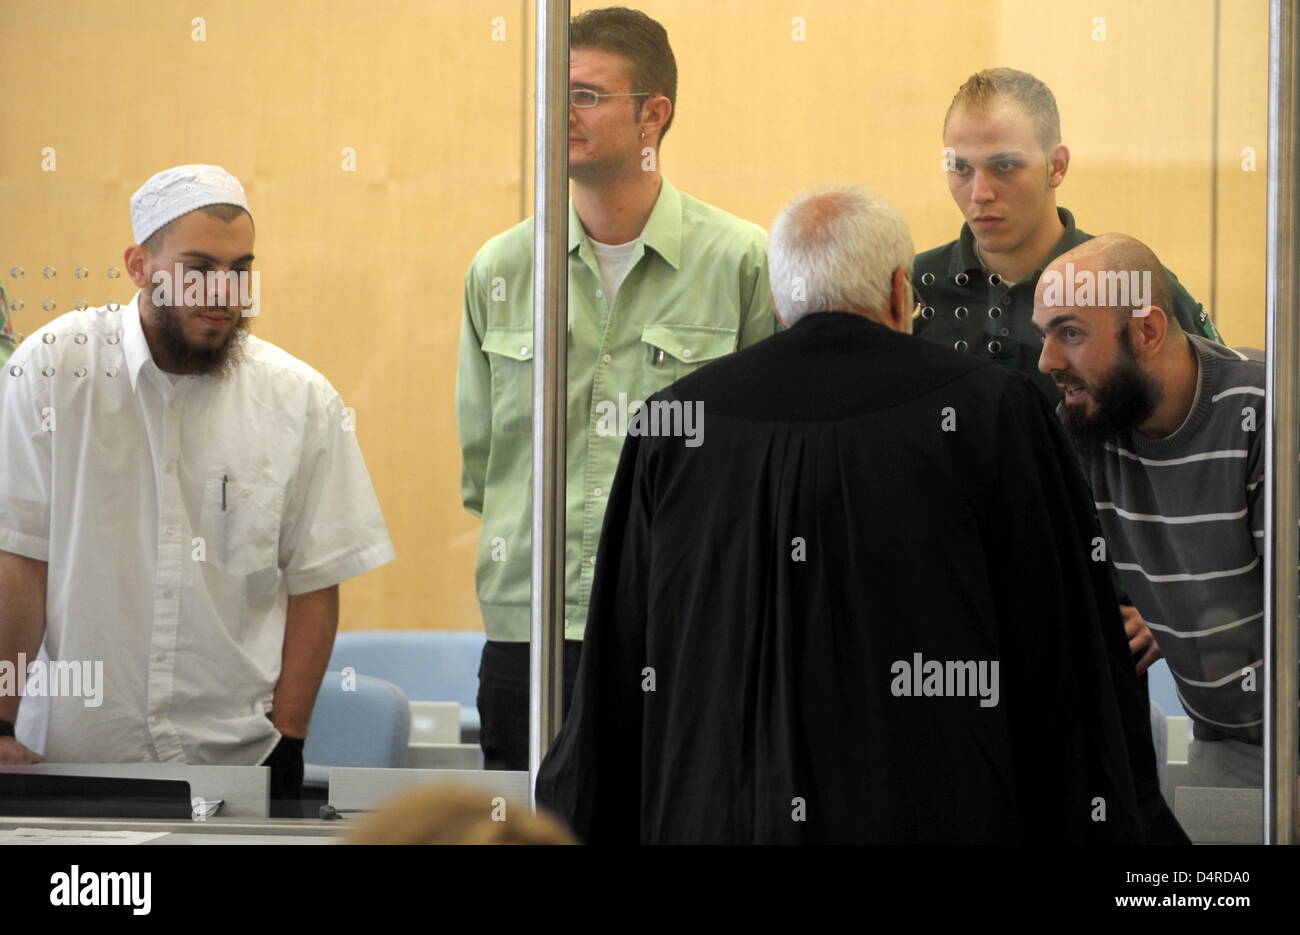 Defendant Adem Yilmaz talks to his lawyer Karl Engel in the hearing room at the Higher Regional Court in Duesseldorf, Germany, 10 August 2009. Defendant Daniel Schneider is pictured to the left. The defendants in the terror trial against the so-called ?Sauerland group? kept their word and started making broad confessions. The four men already had more than 1000 pages of confessions Stock Photo